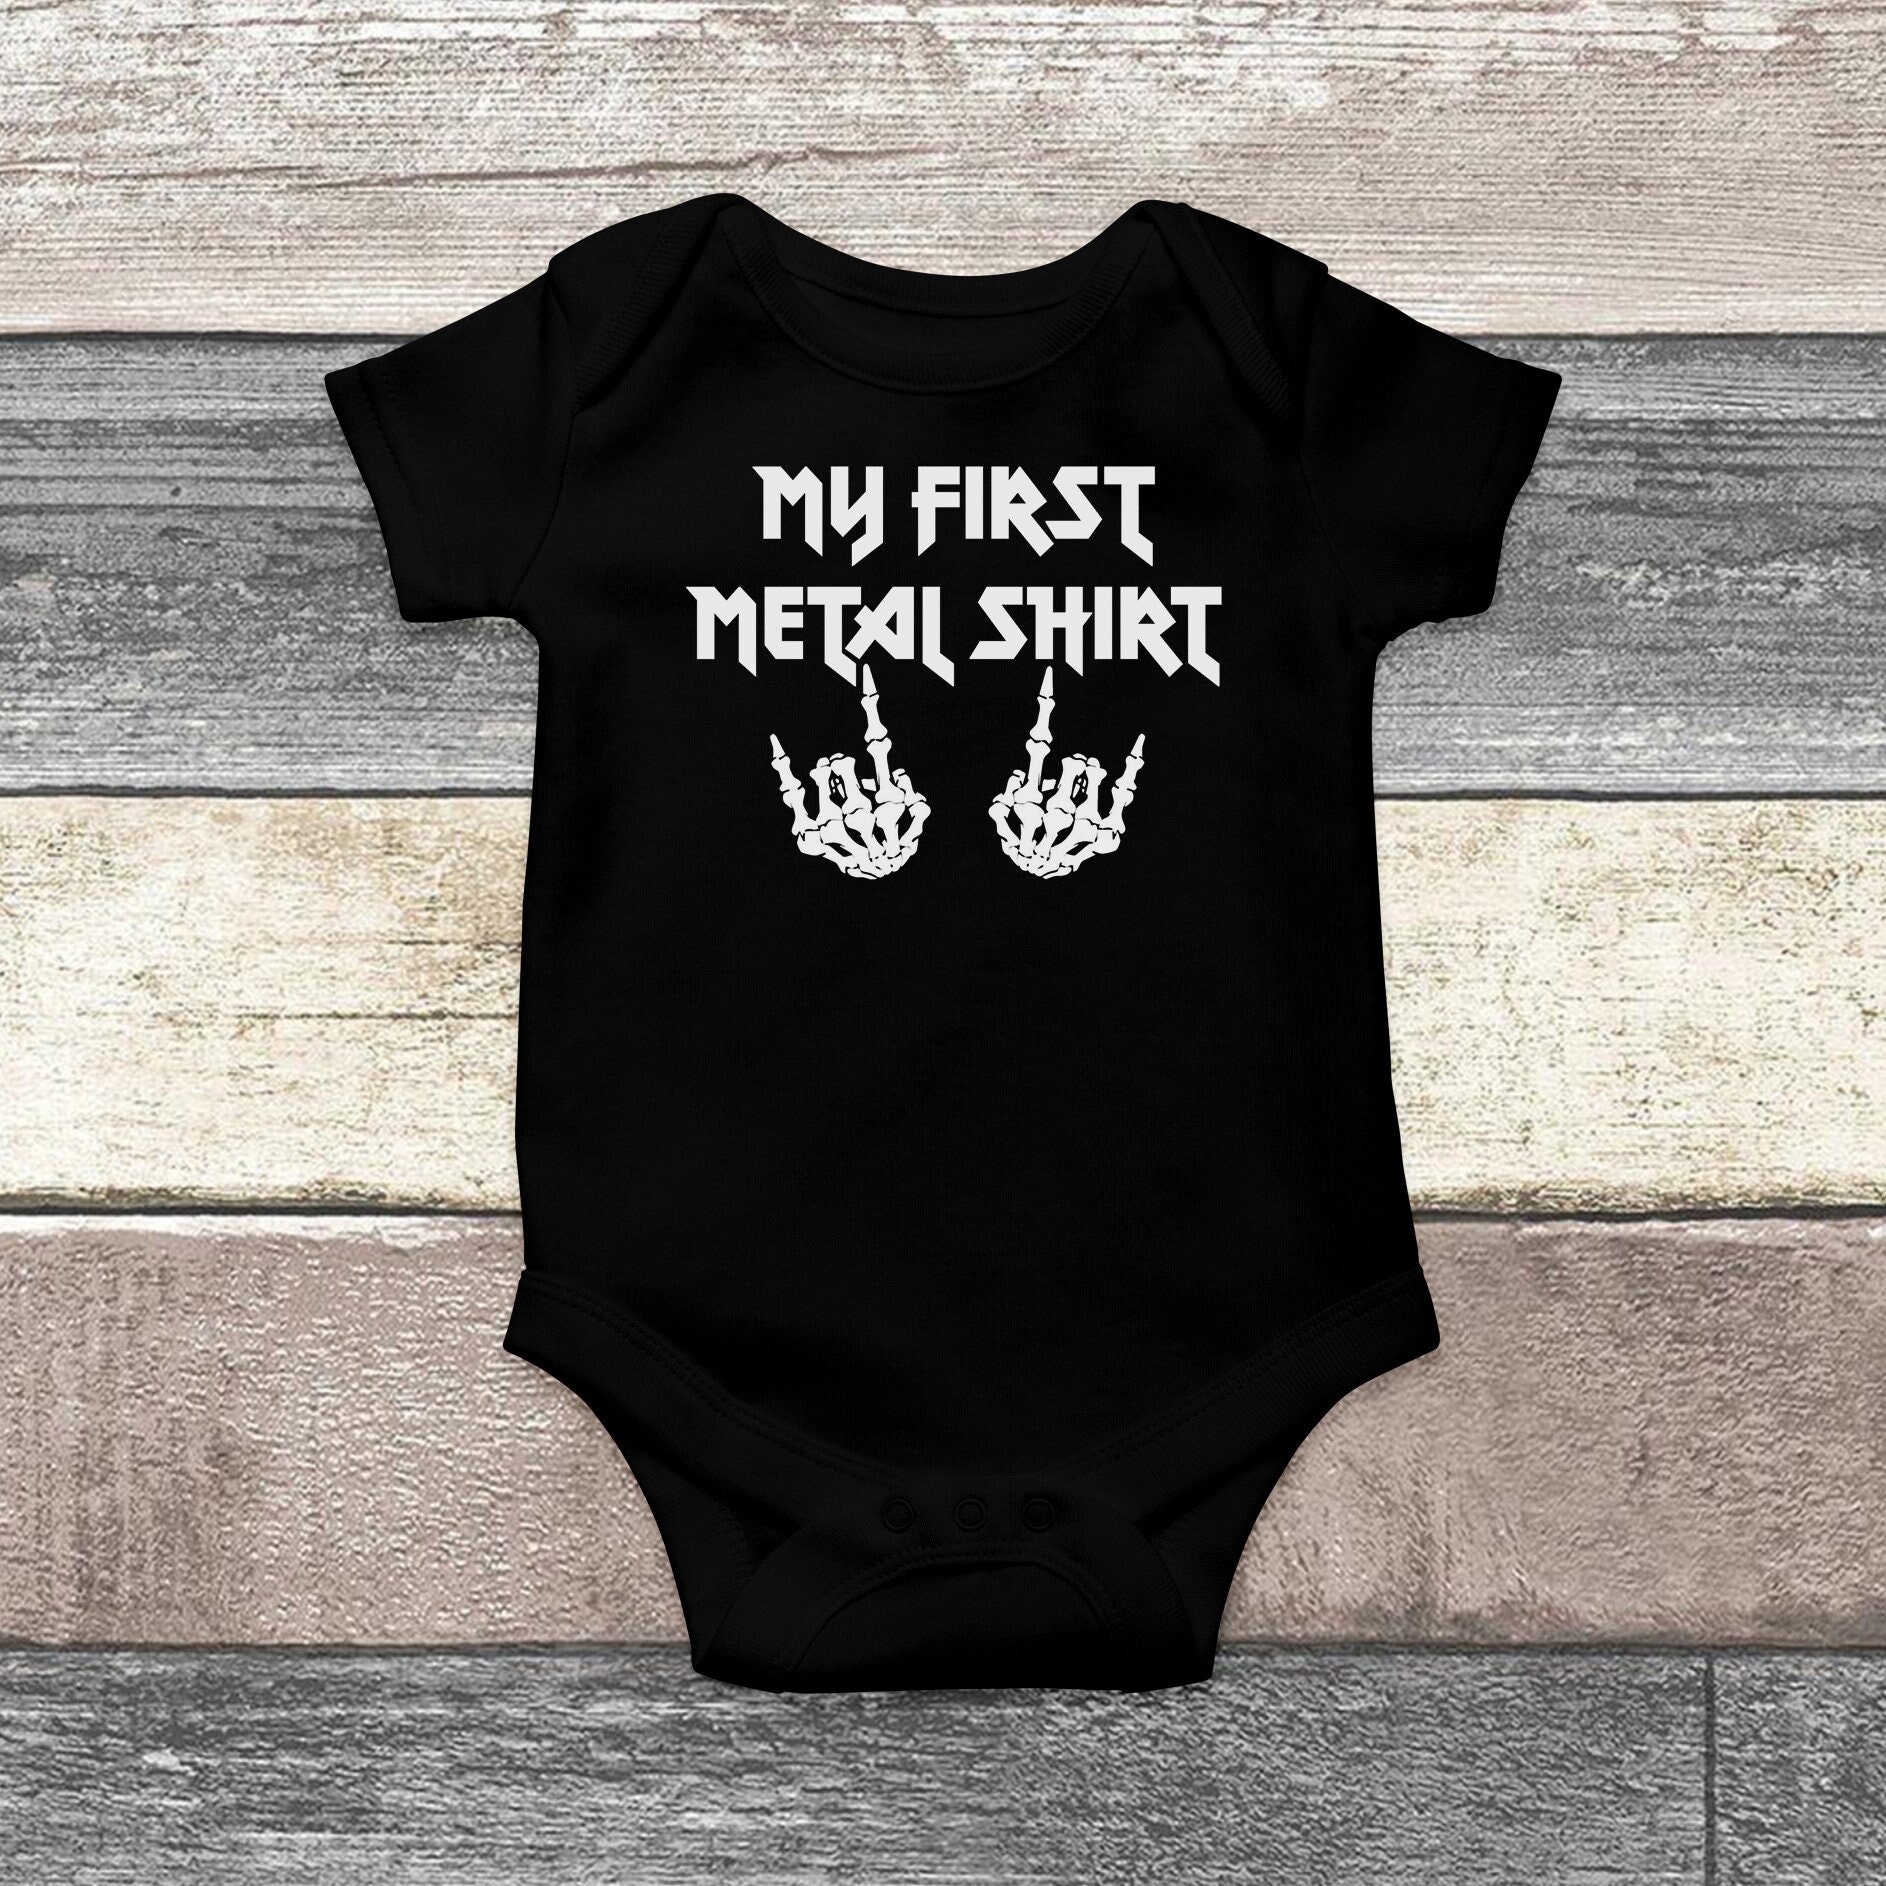 Heavy Metal Baby Bodysuit, My First Metal Shirt, Rock Band Baby Clothes,  Funny Baby Clothes, Hipster Baby Clothes, Rocker, Baby Announcement